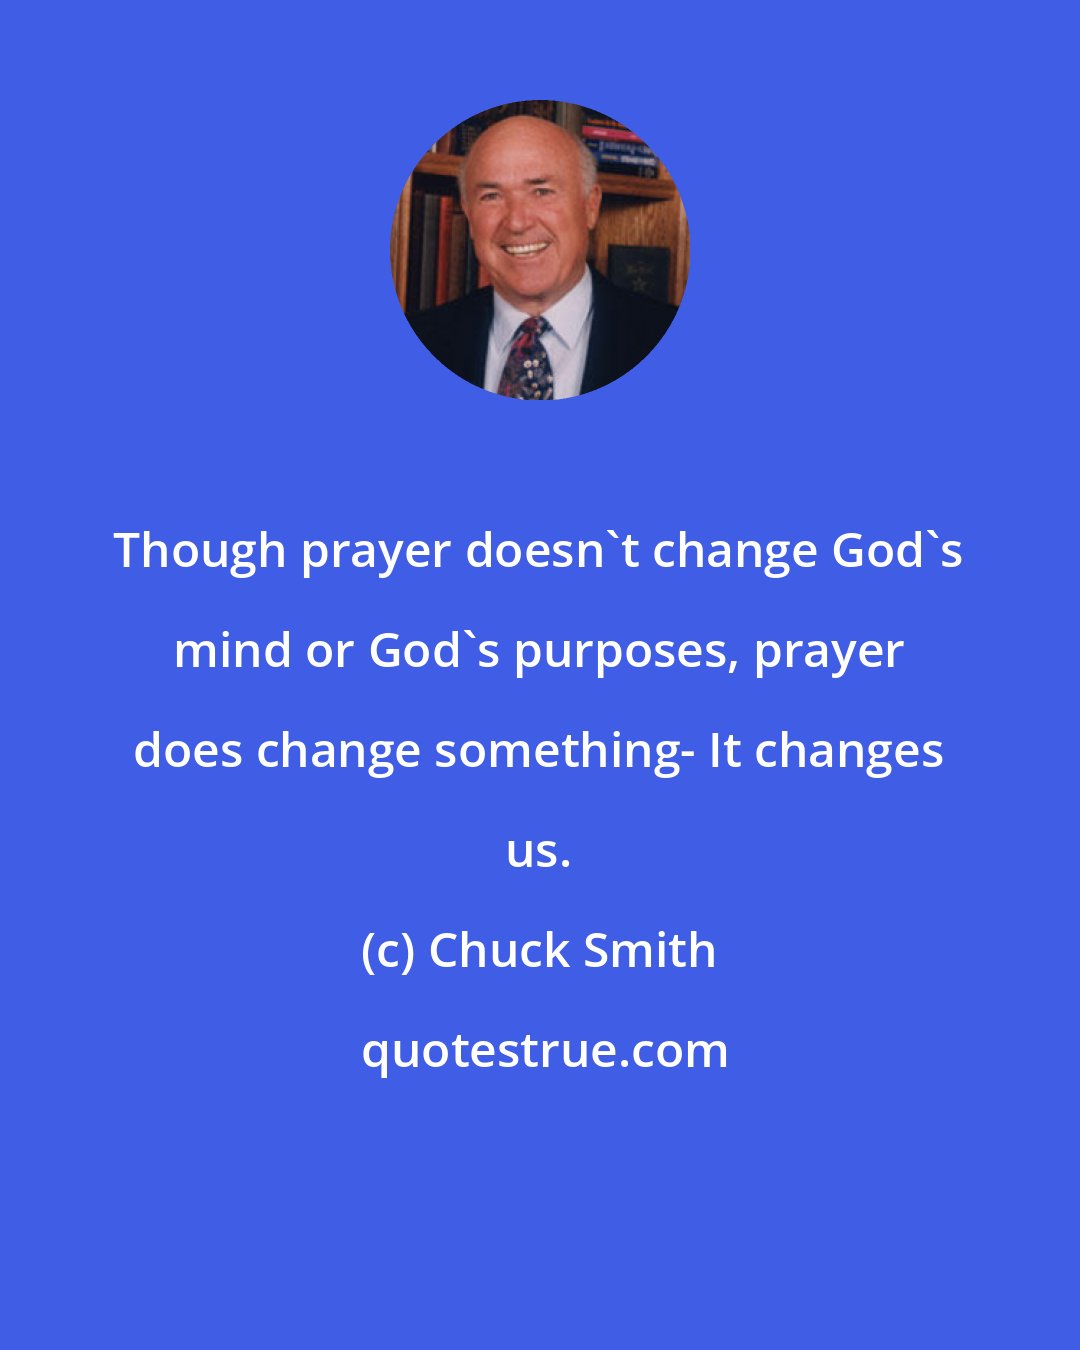 Chuck Smith: Though prayer doesn't change God's mind or God's purposes, prayer does change something- It changes us.